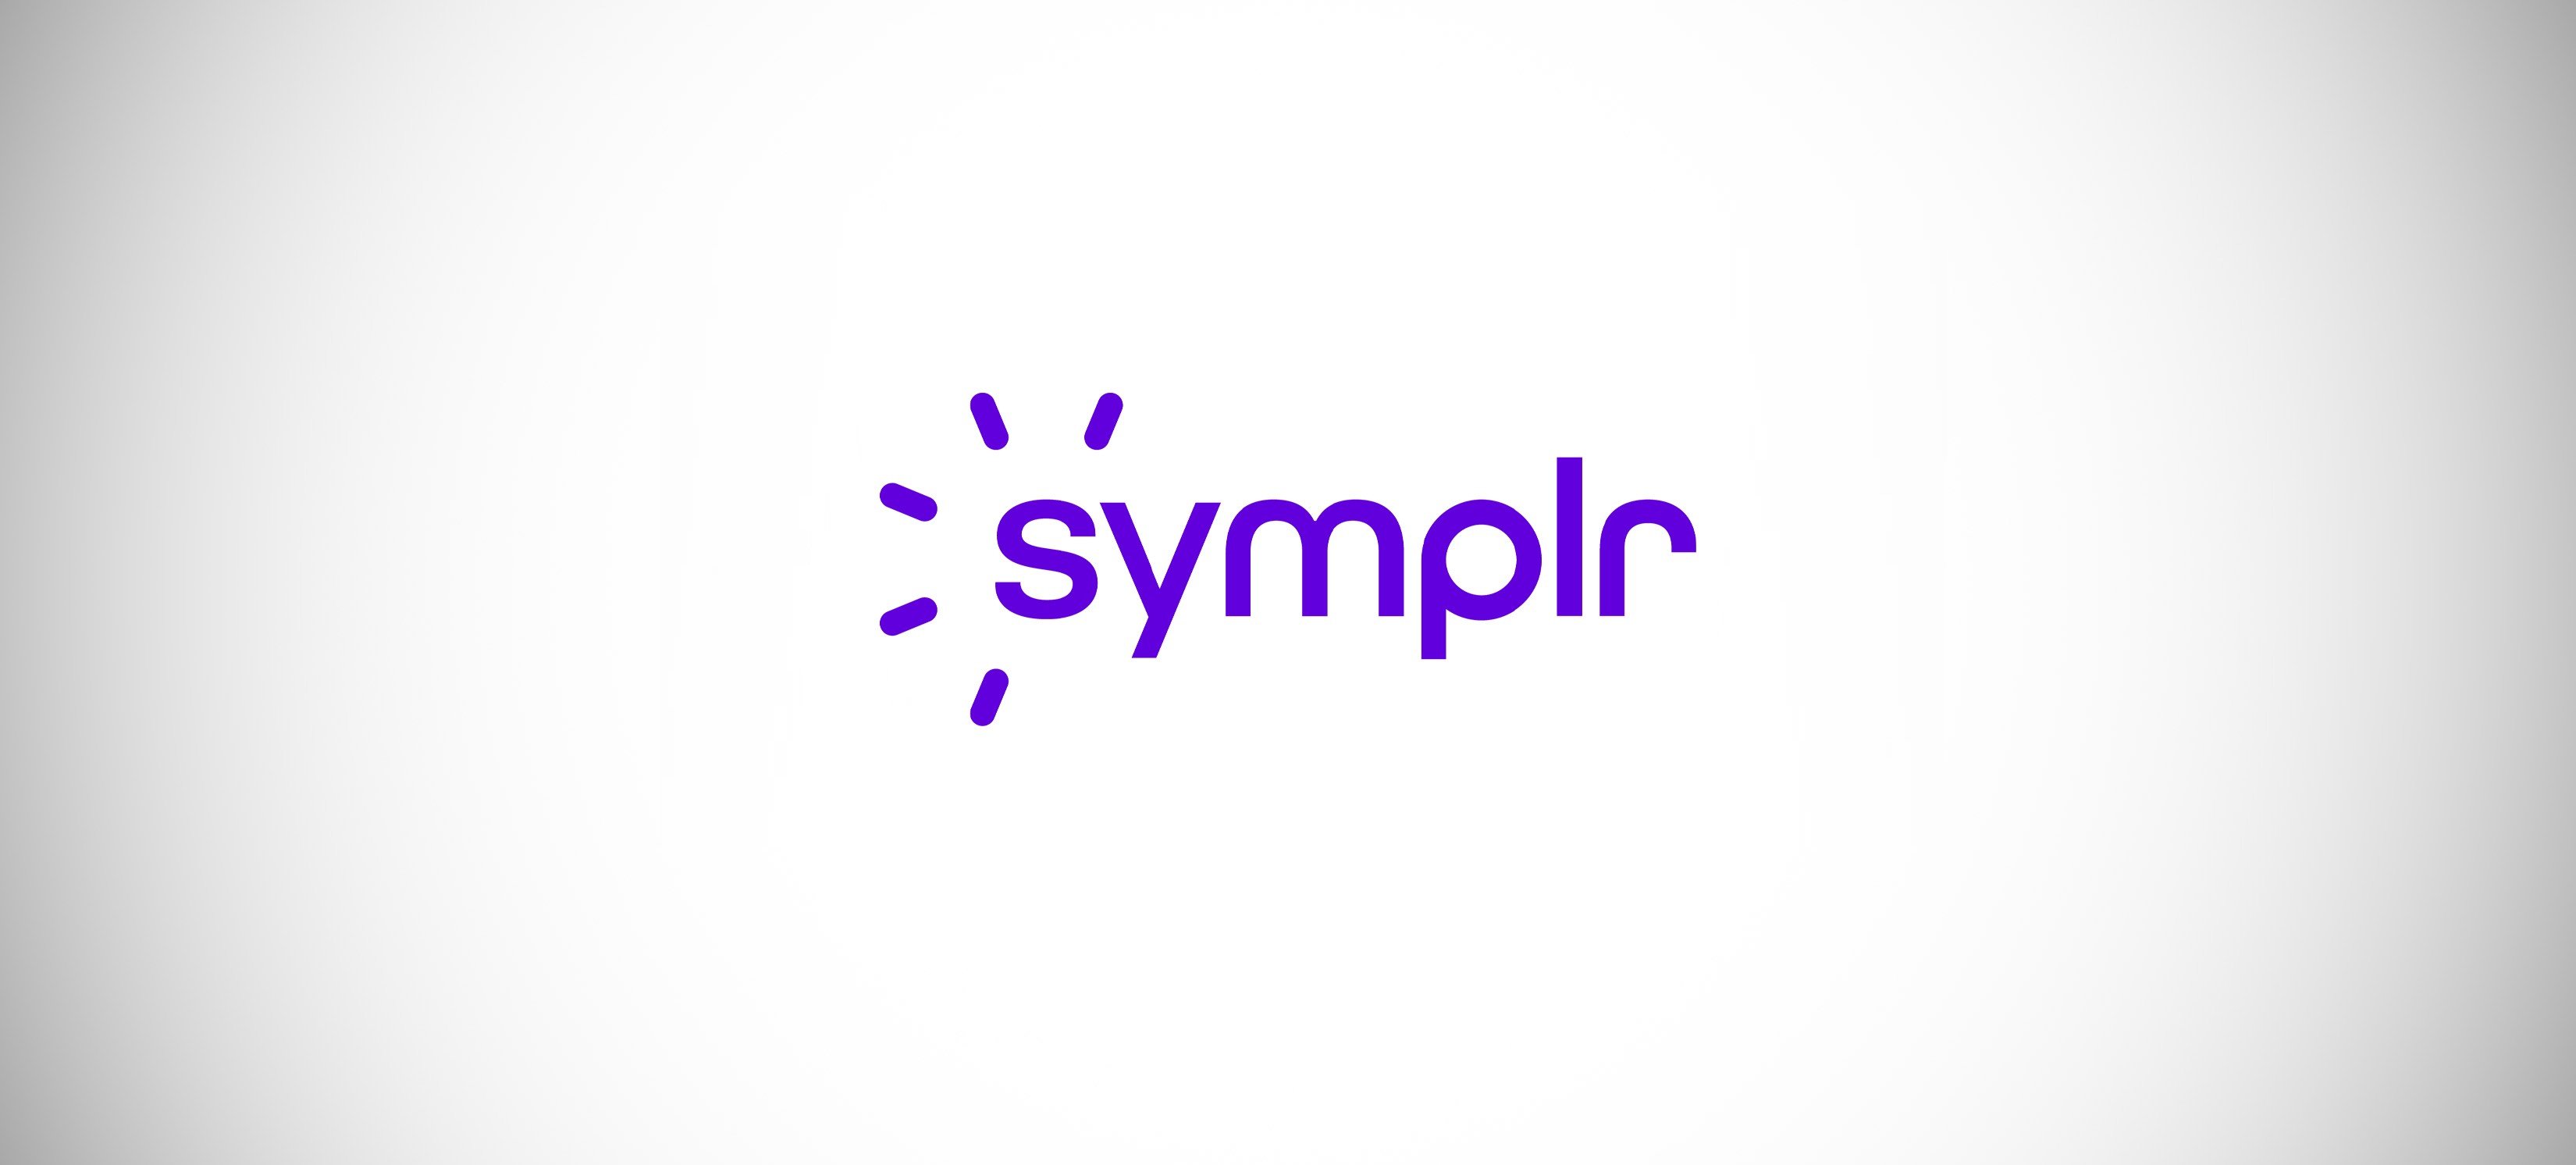 symplr Spearheads Sweeping Pledge to Advance Healthcare Operations